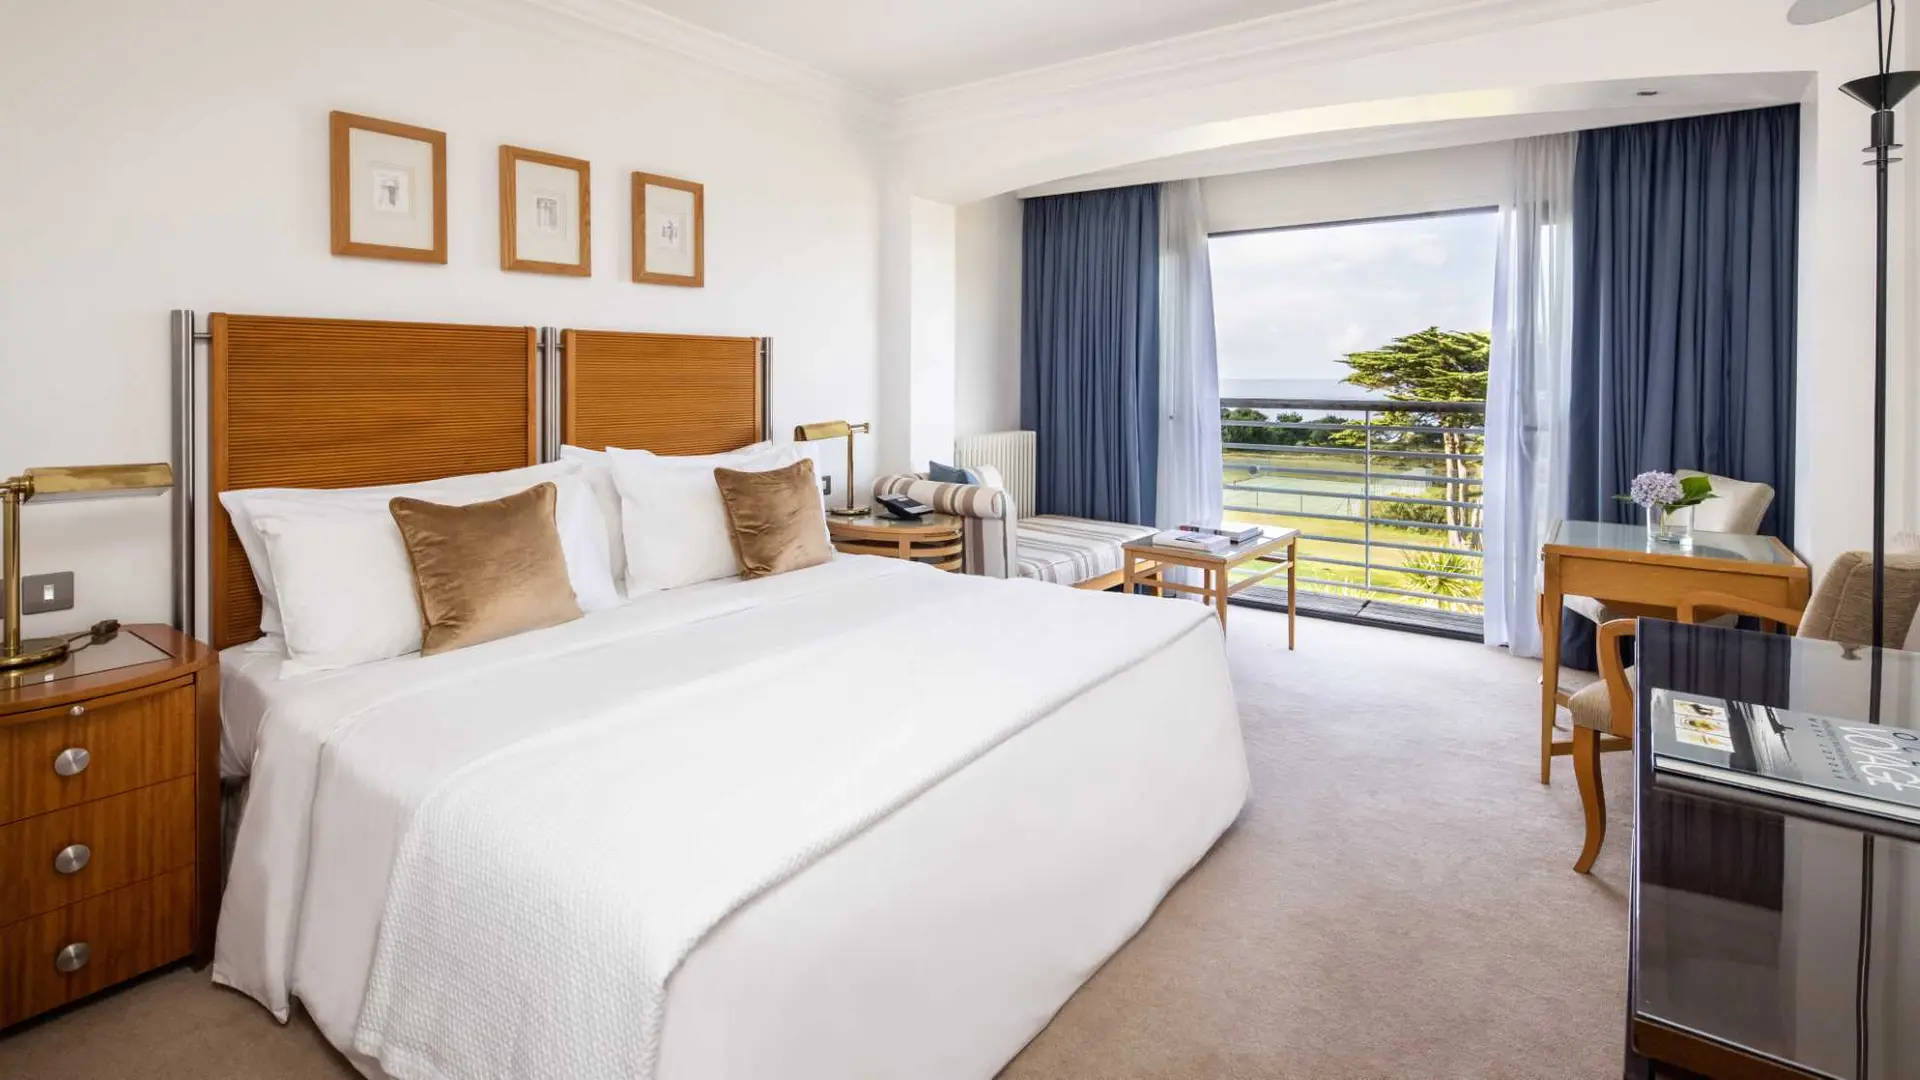 Hotel review Accommodation' - The Atlantic Hotel Jersey - 1